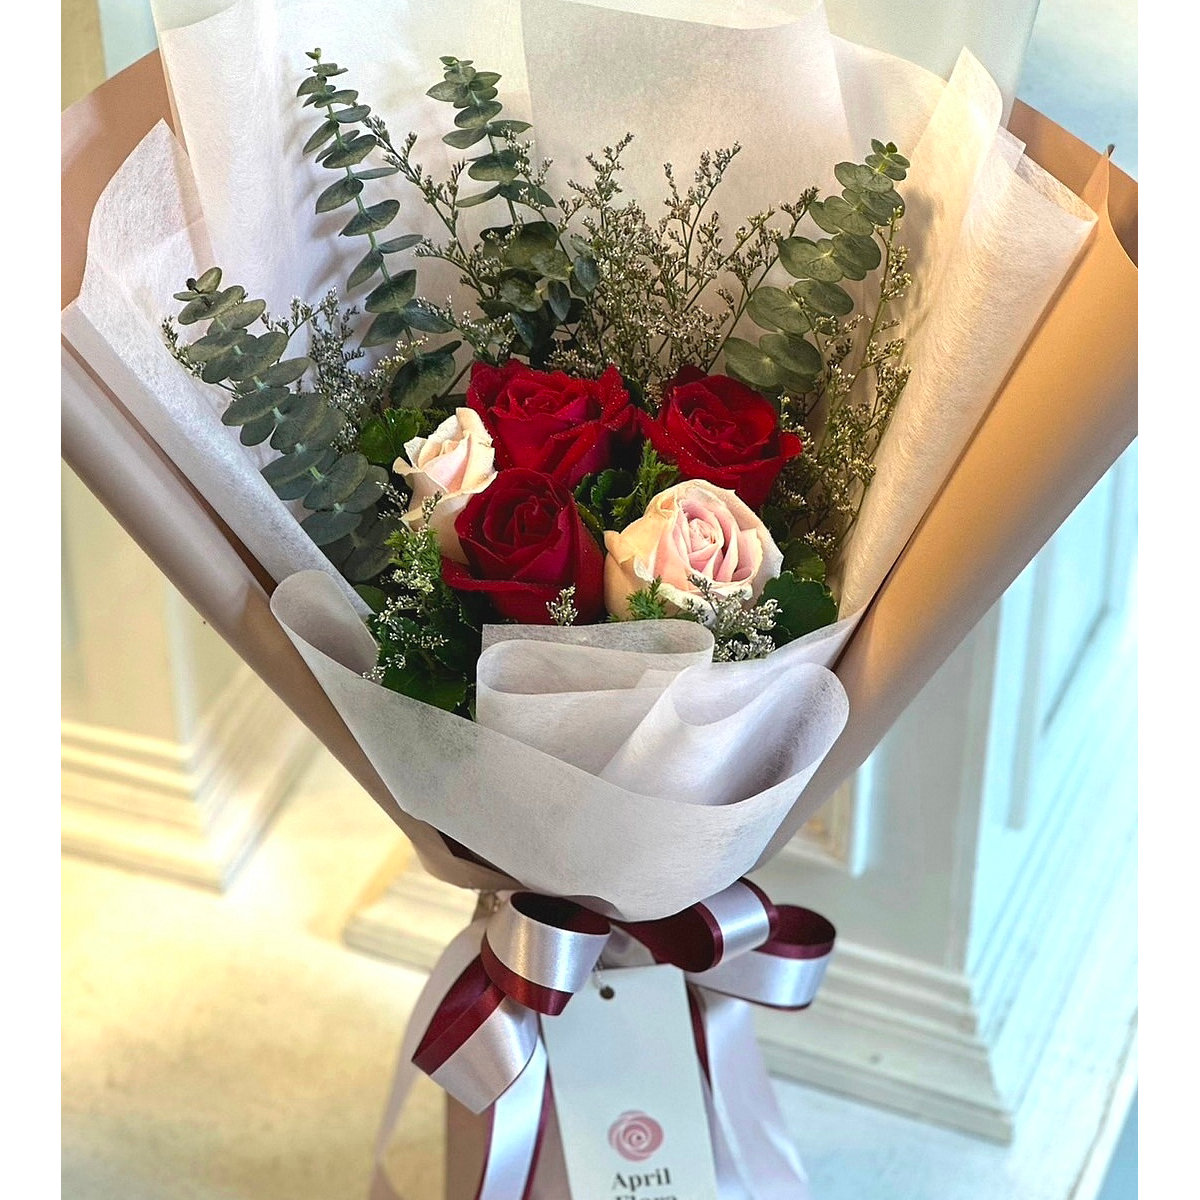 "Surprise" Bouquet Of Roses and Caspia